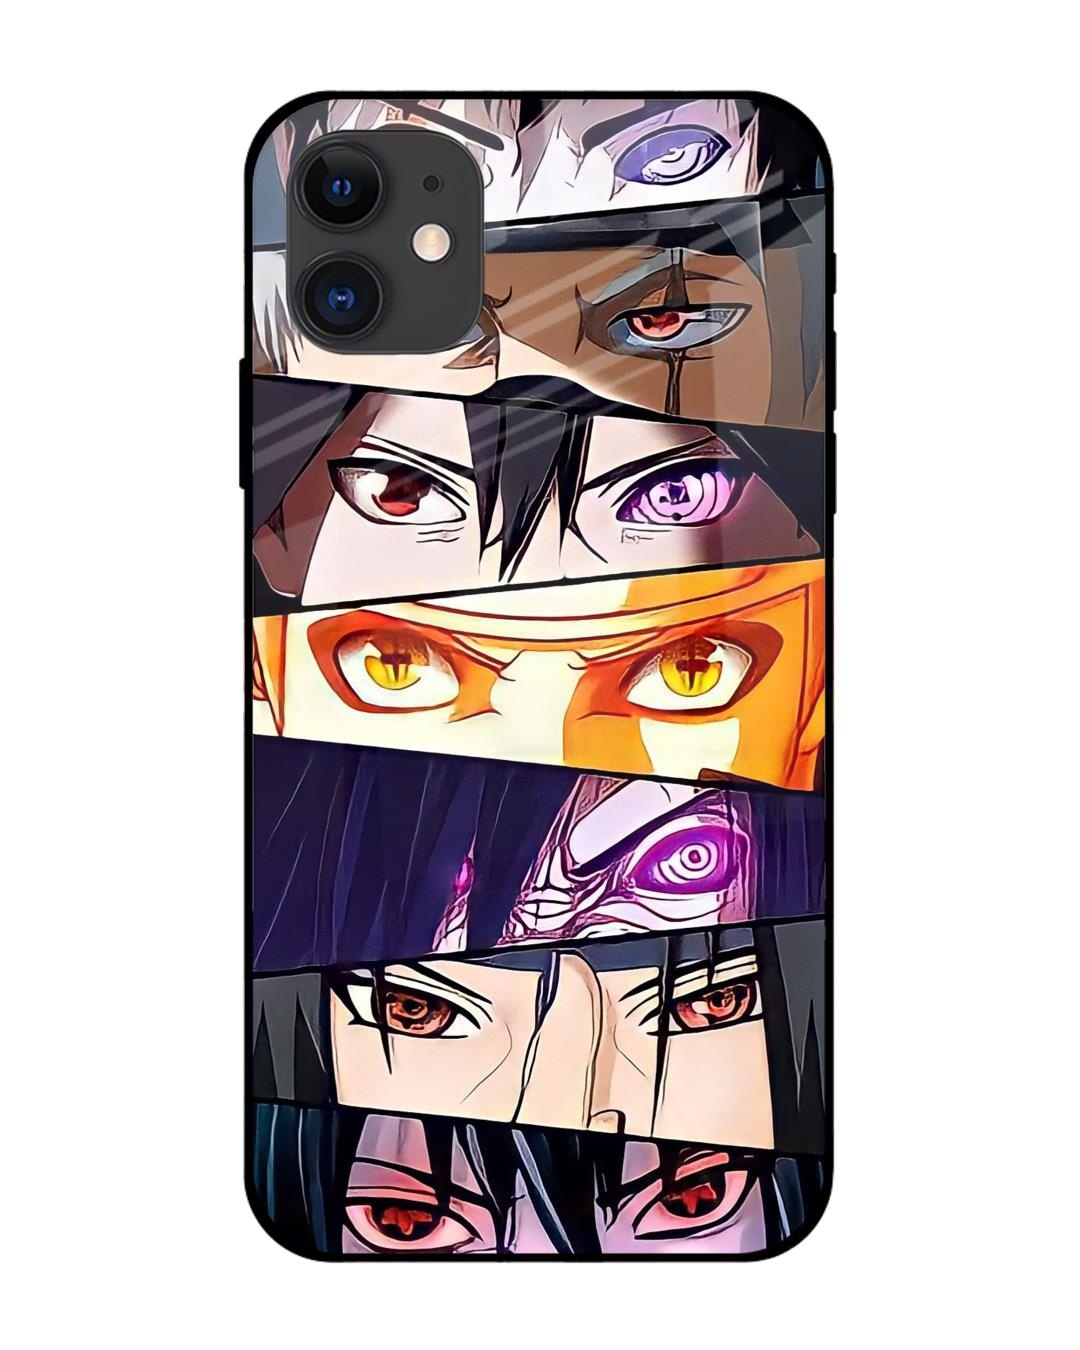 Anime One Piece Luffy Silhouette Metal Back Case for iPhone 12 Pro  Mobile  Phone Covers  Cases in India Online at CoversCartcom